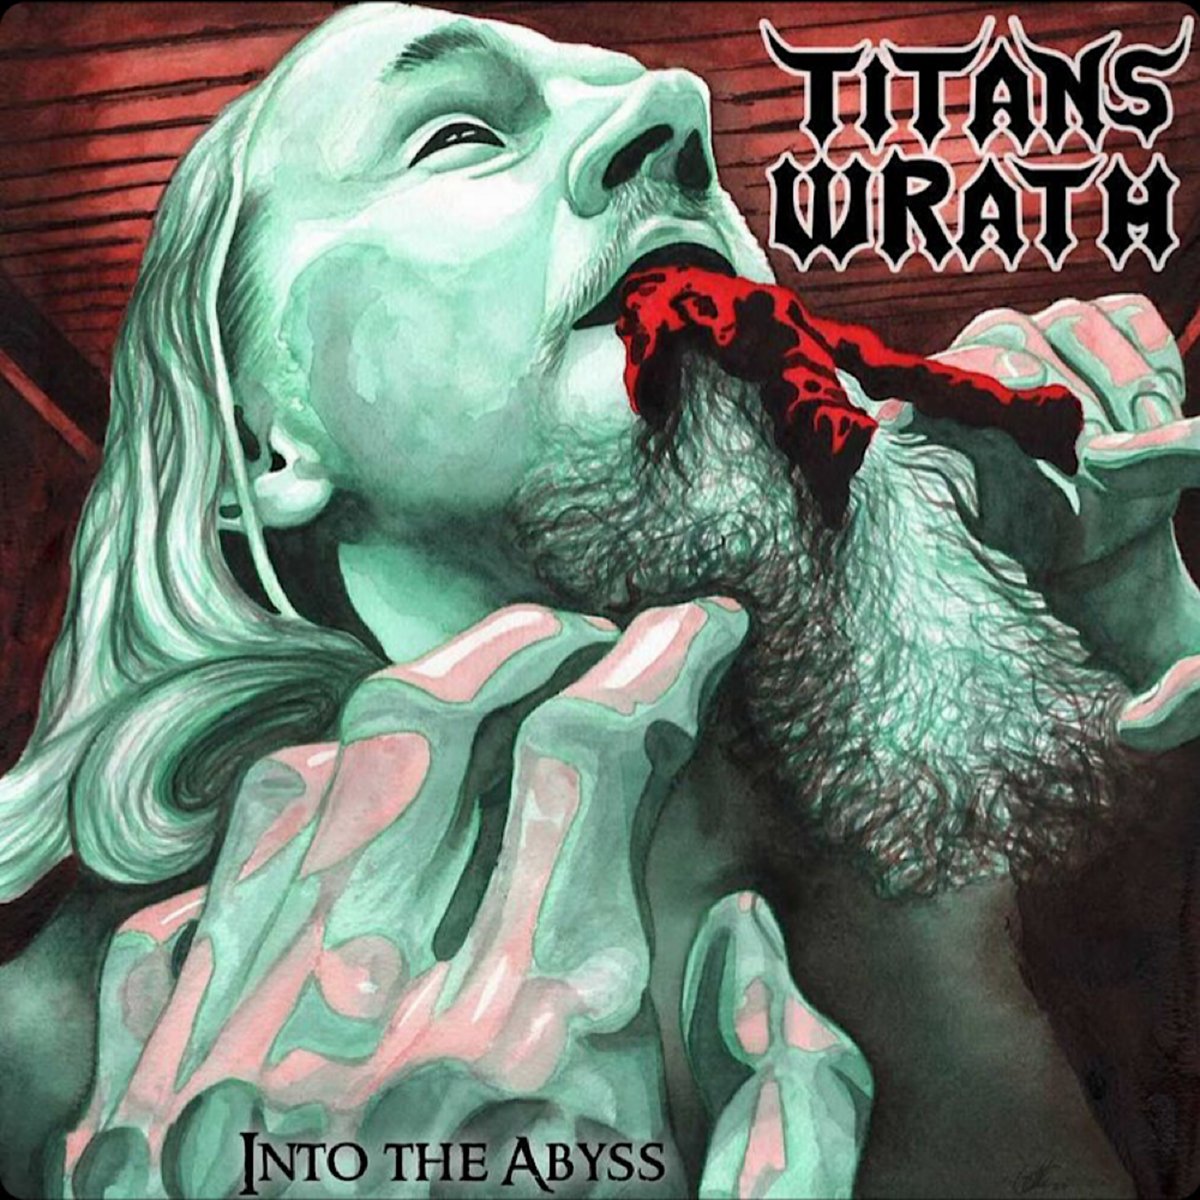 Interview with TITAN'S WRATH